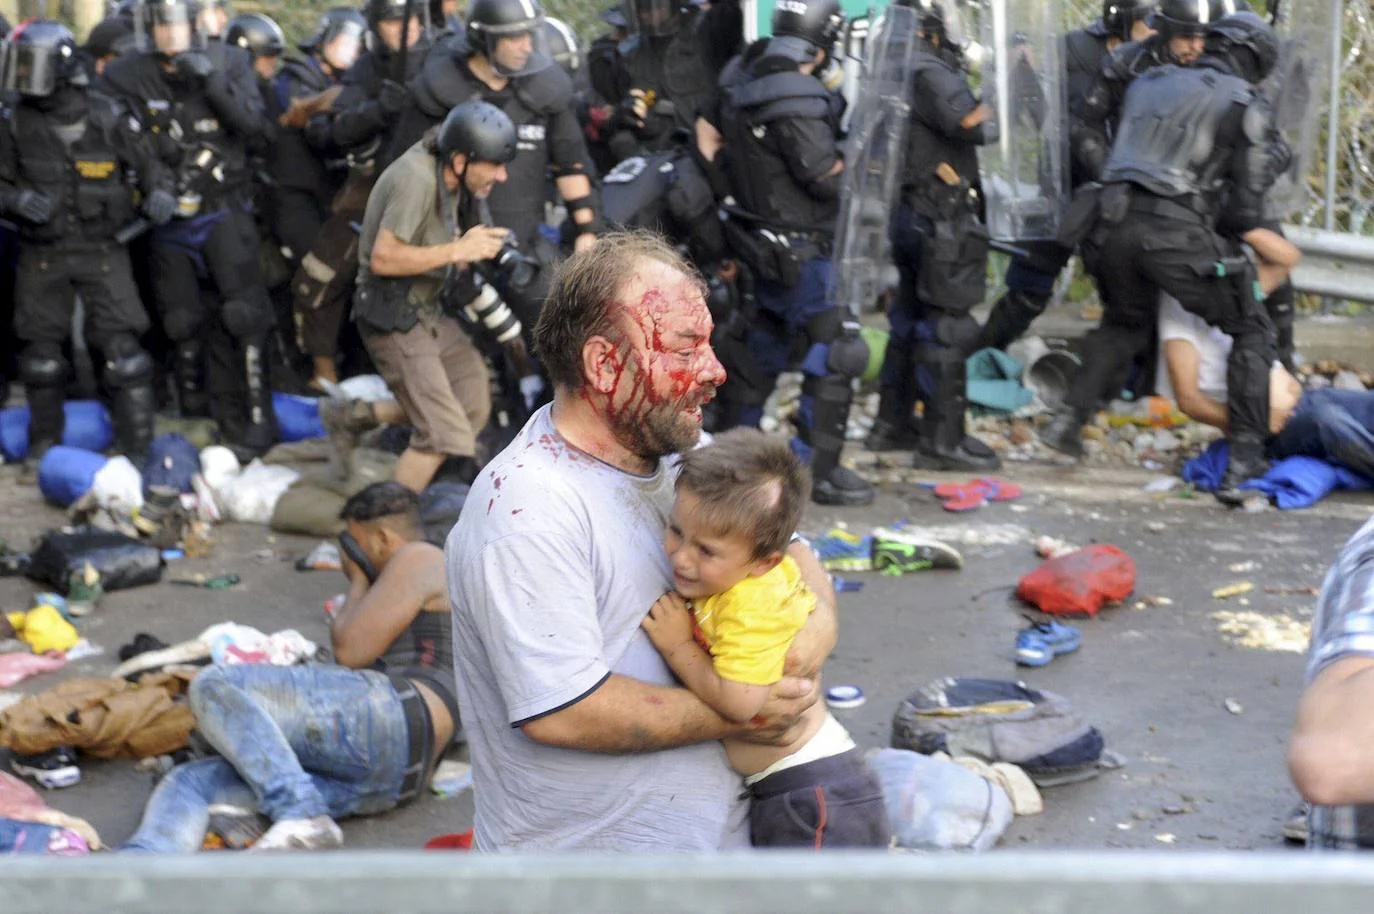 Hungarian policemen beat Syrian refugees in a file image. 